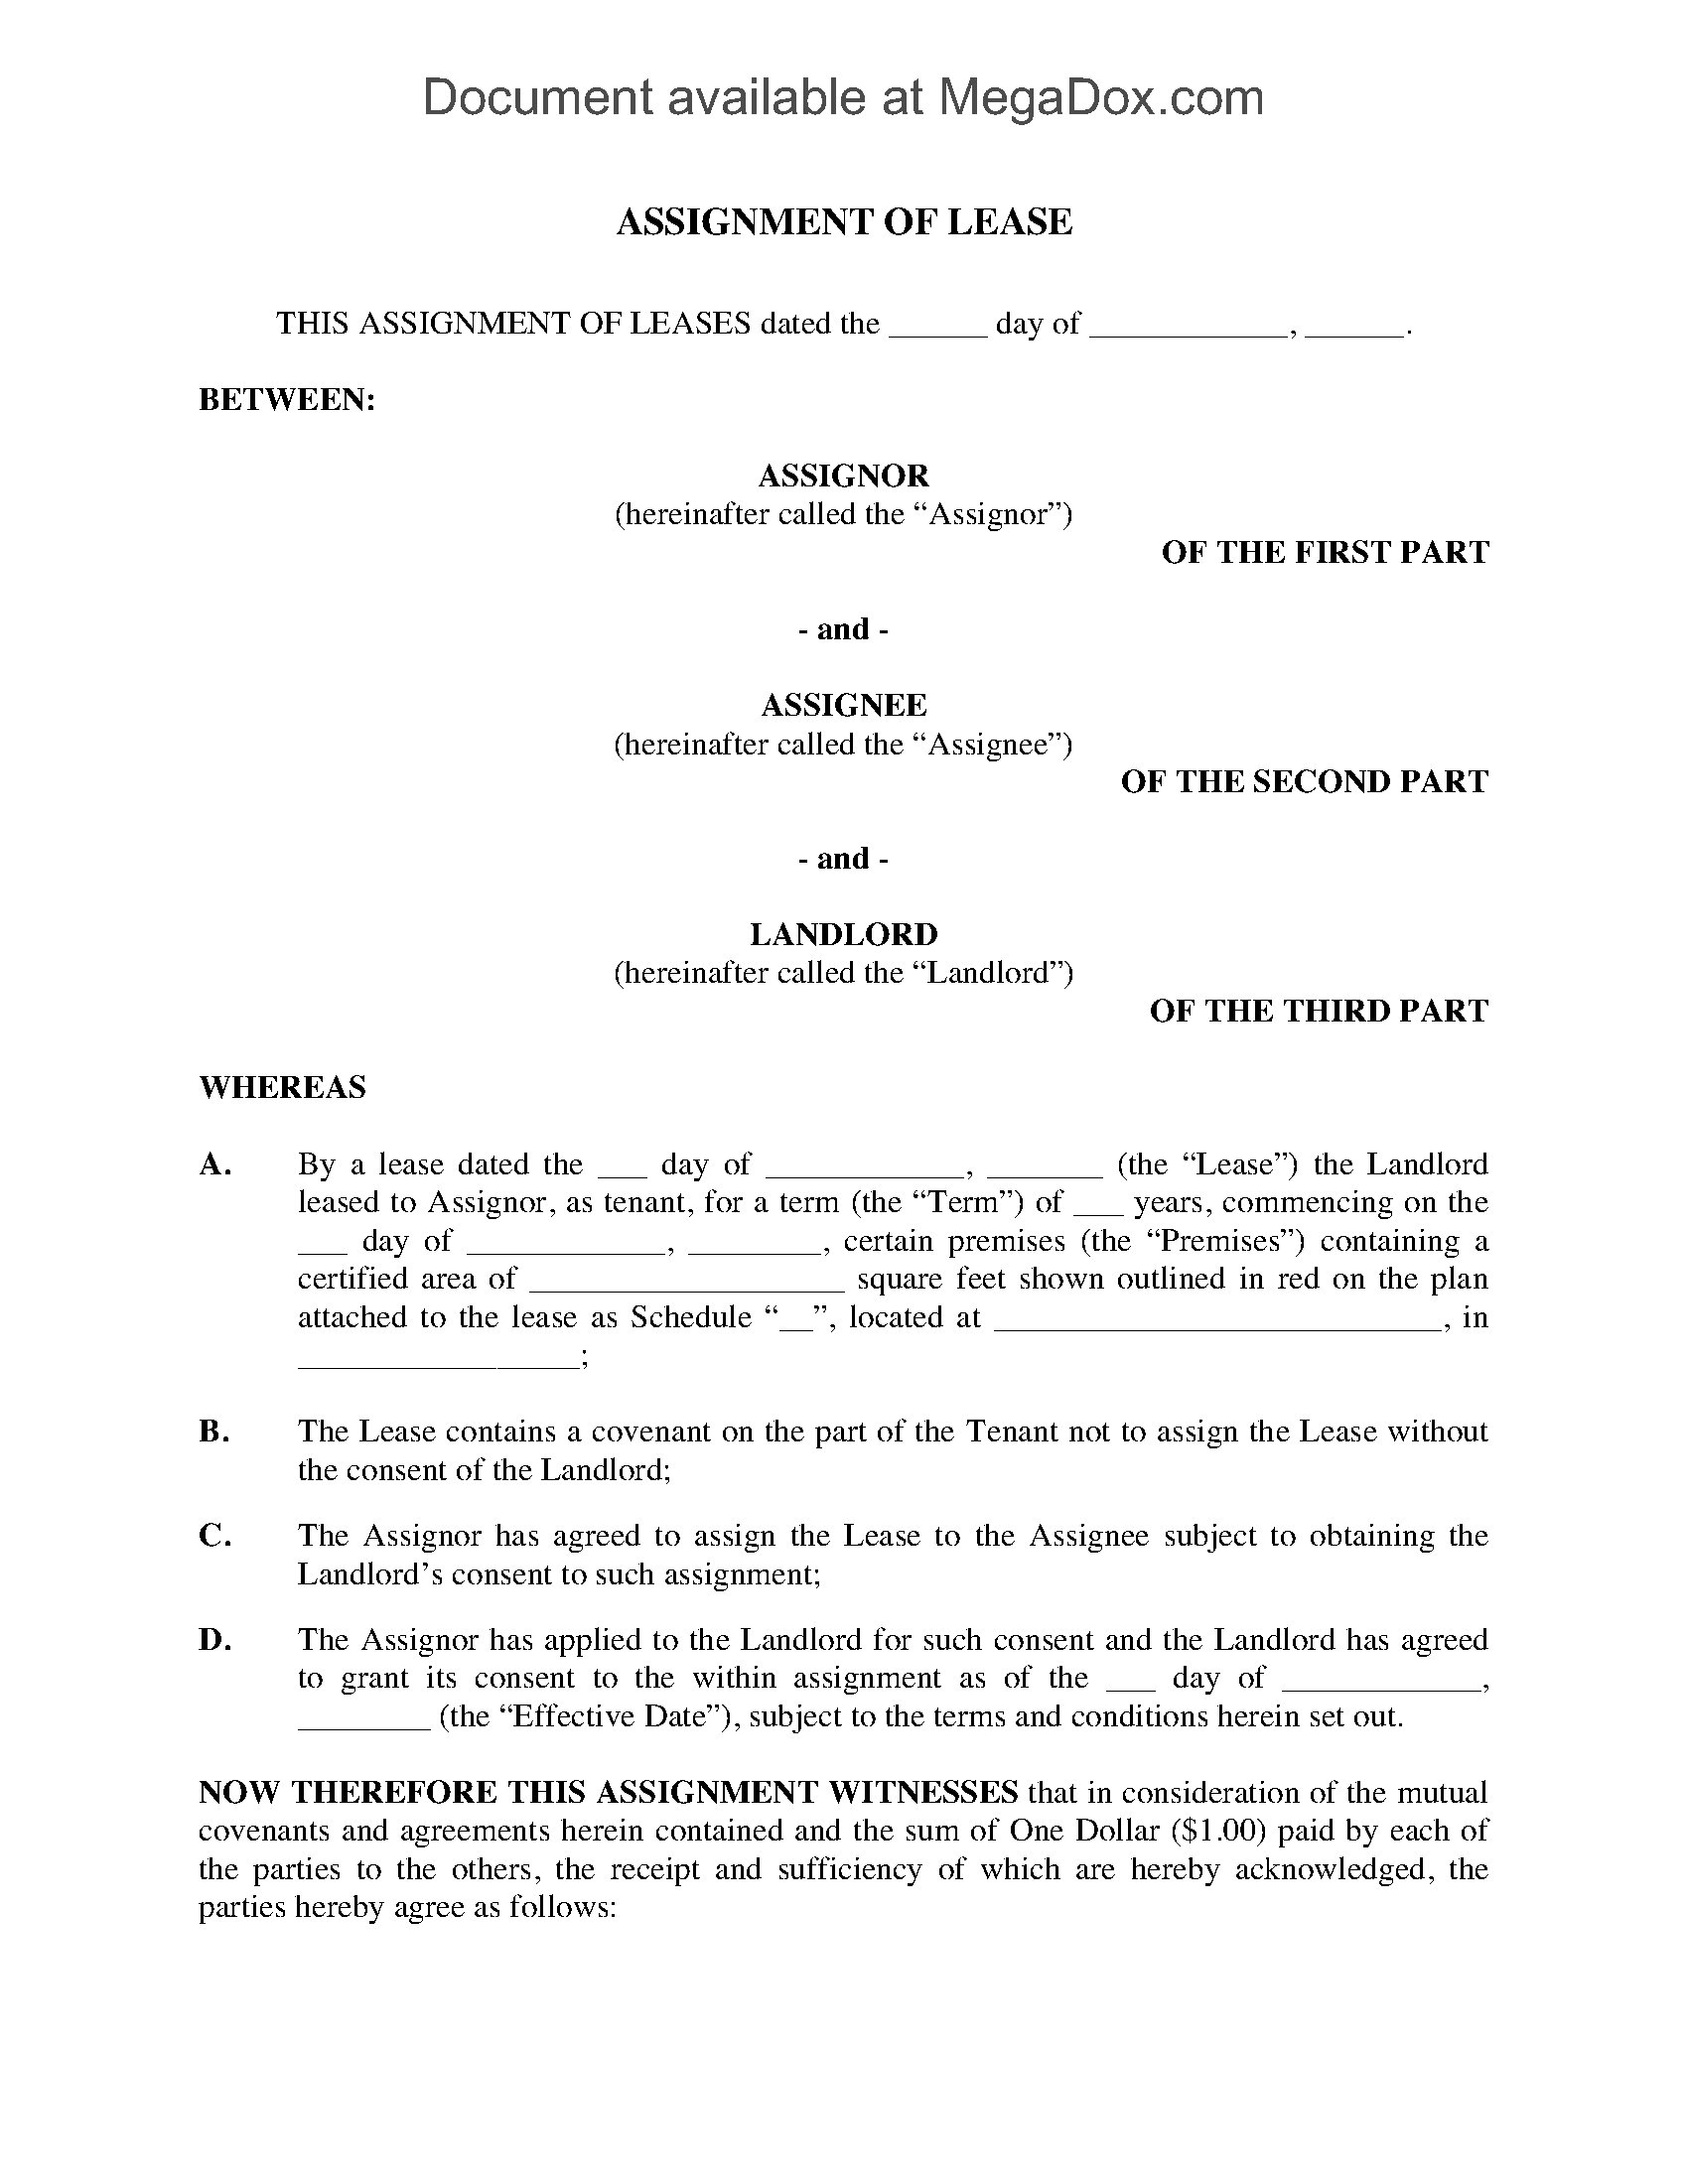 assignment of lease precedent